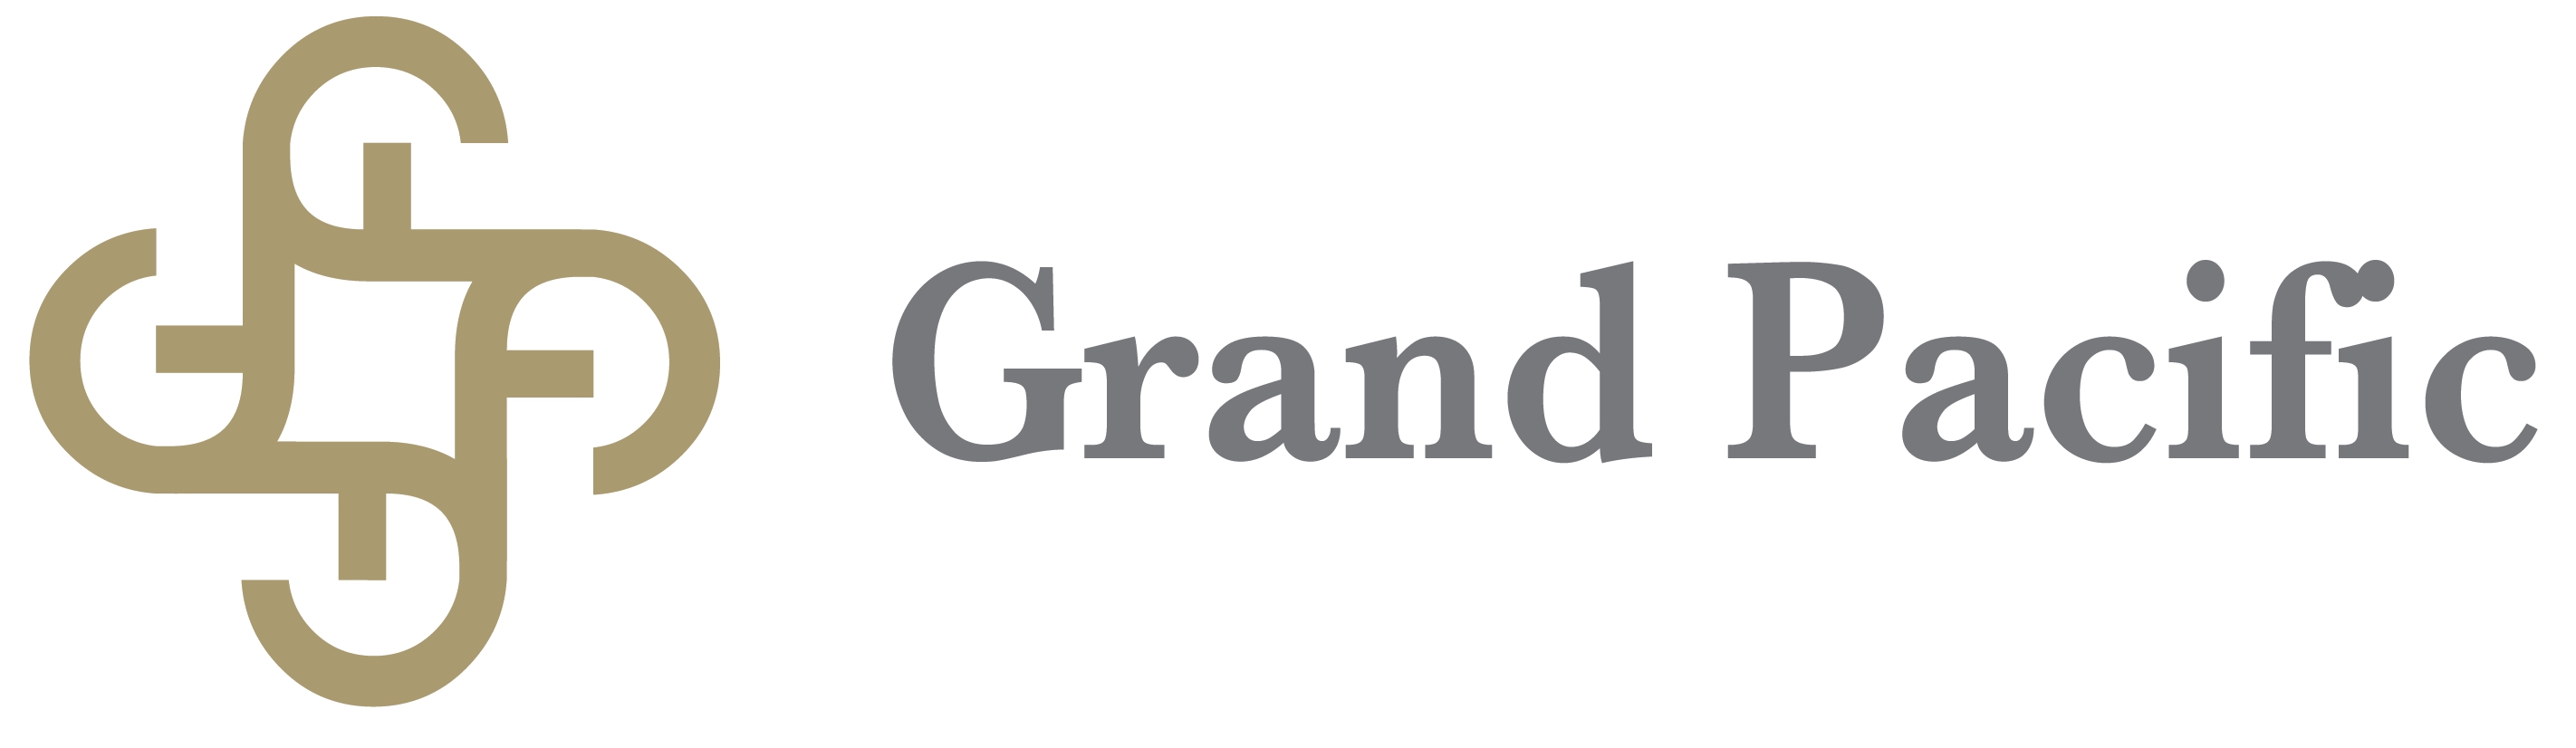 Grand Pacific Financing Corp